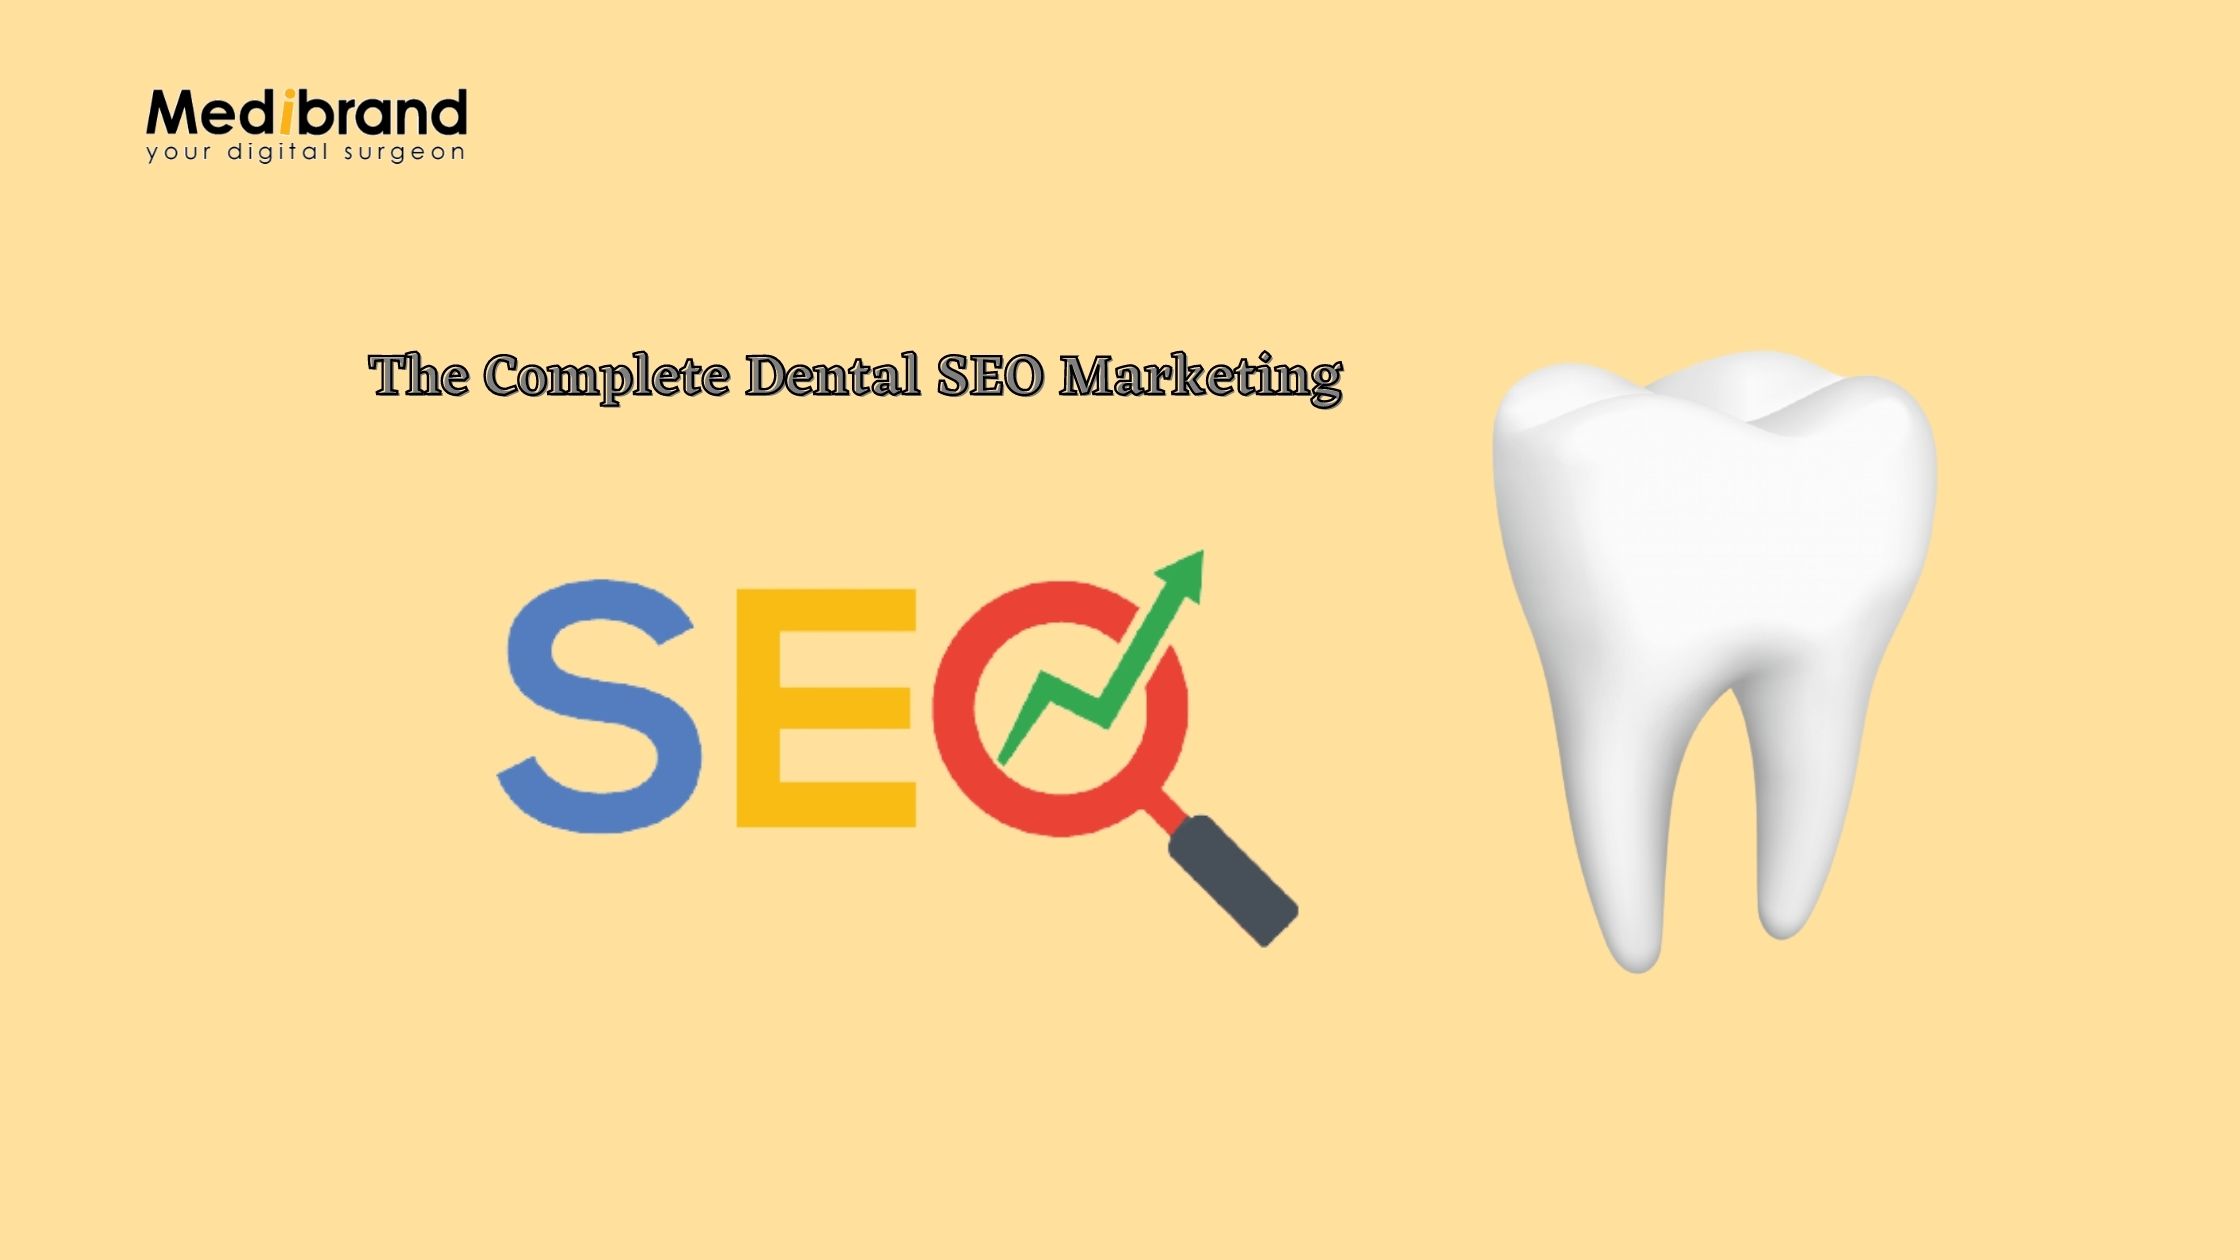 Article about Dental SEO Marketing Company